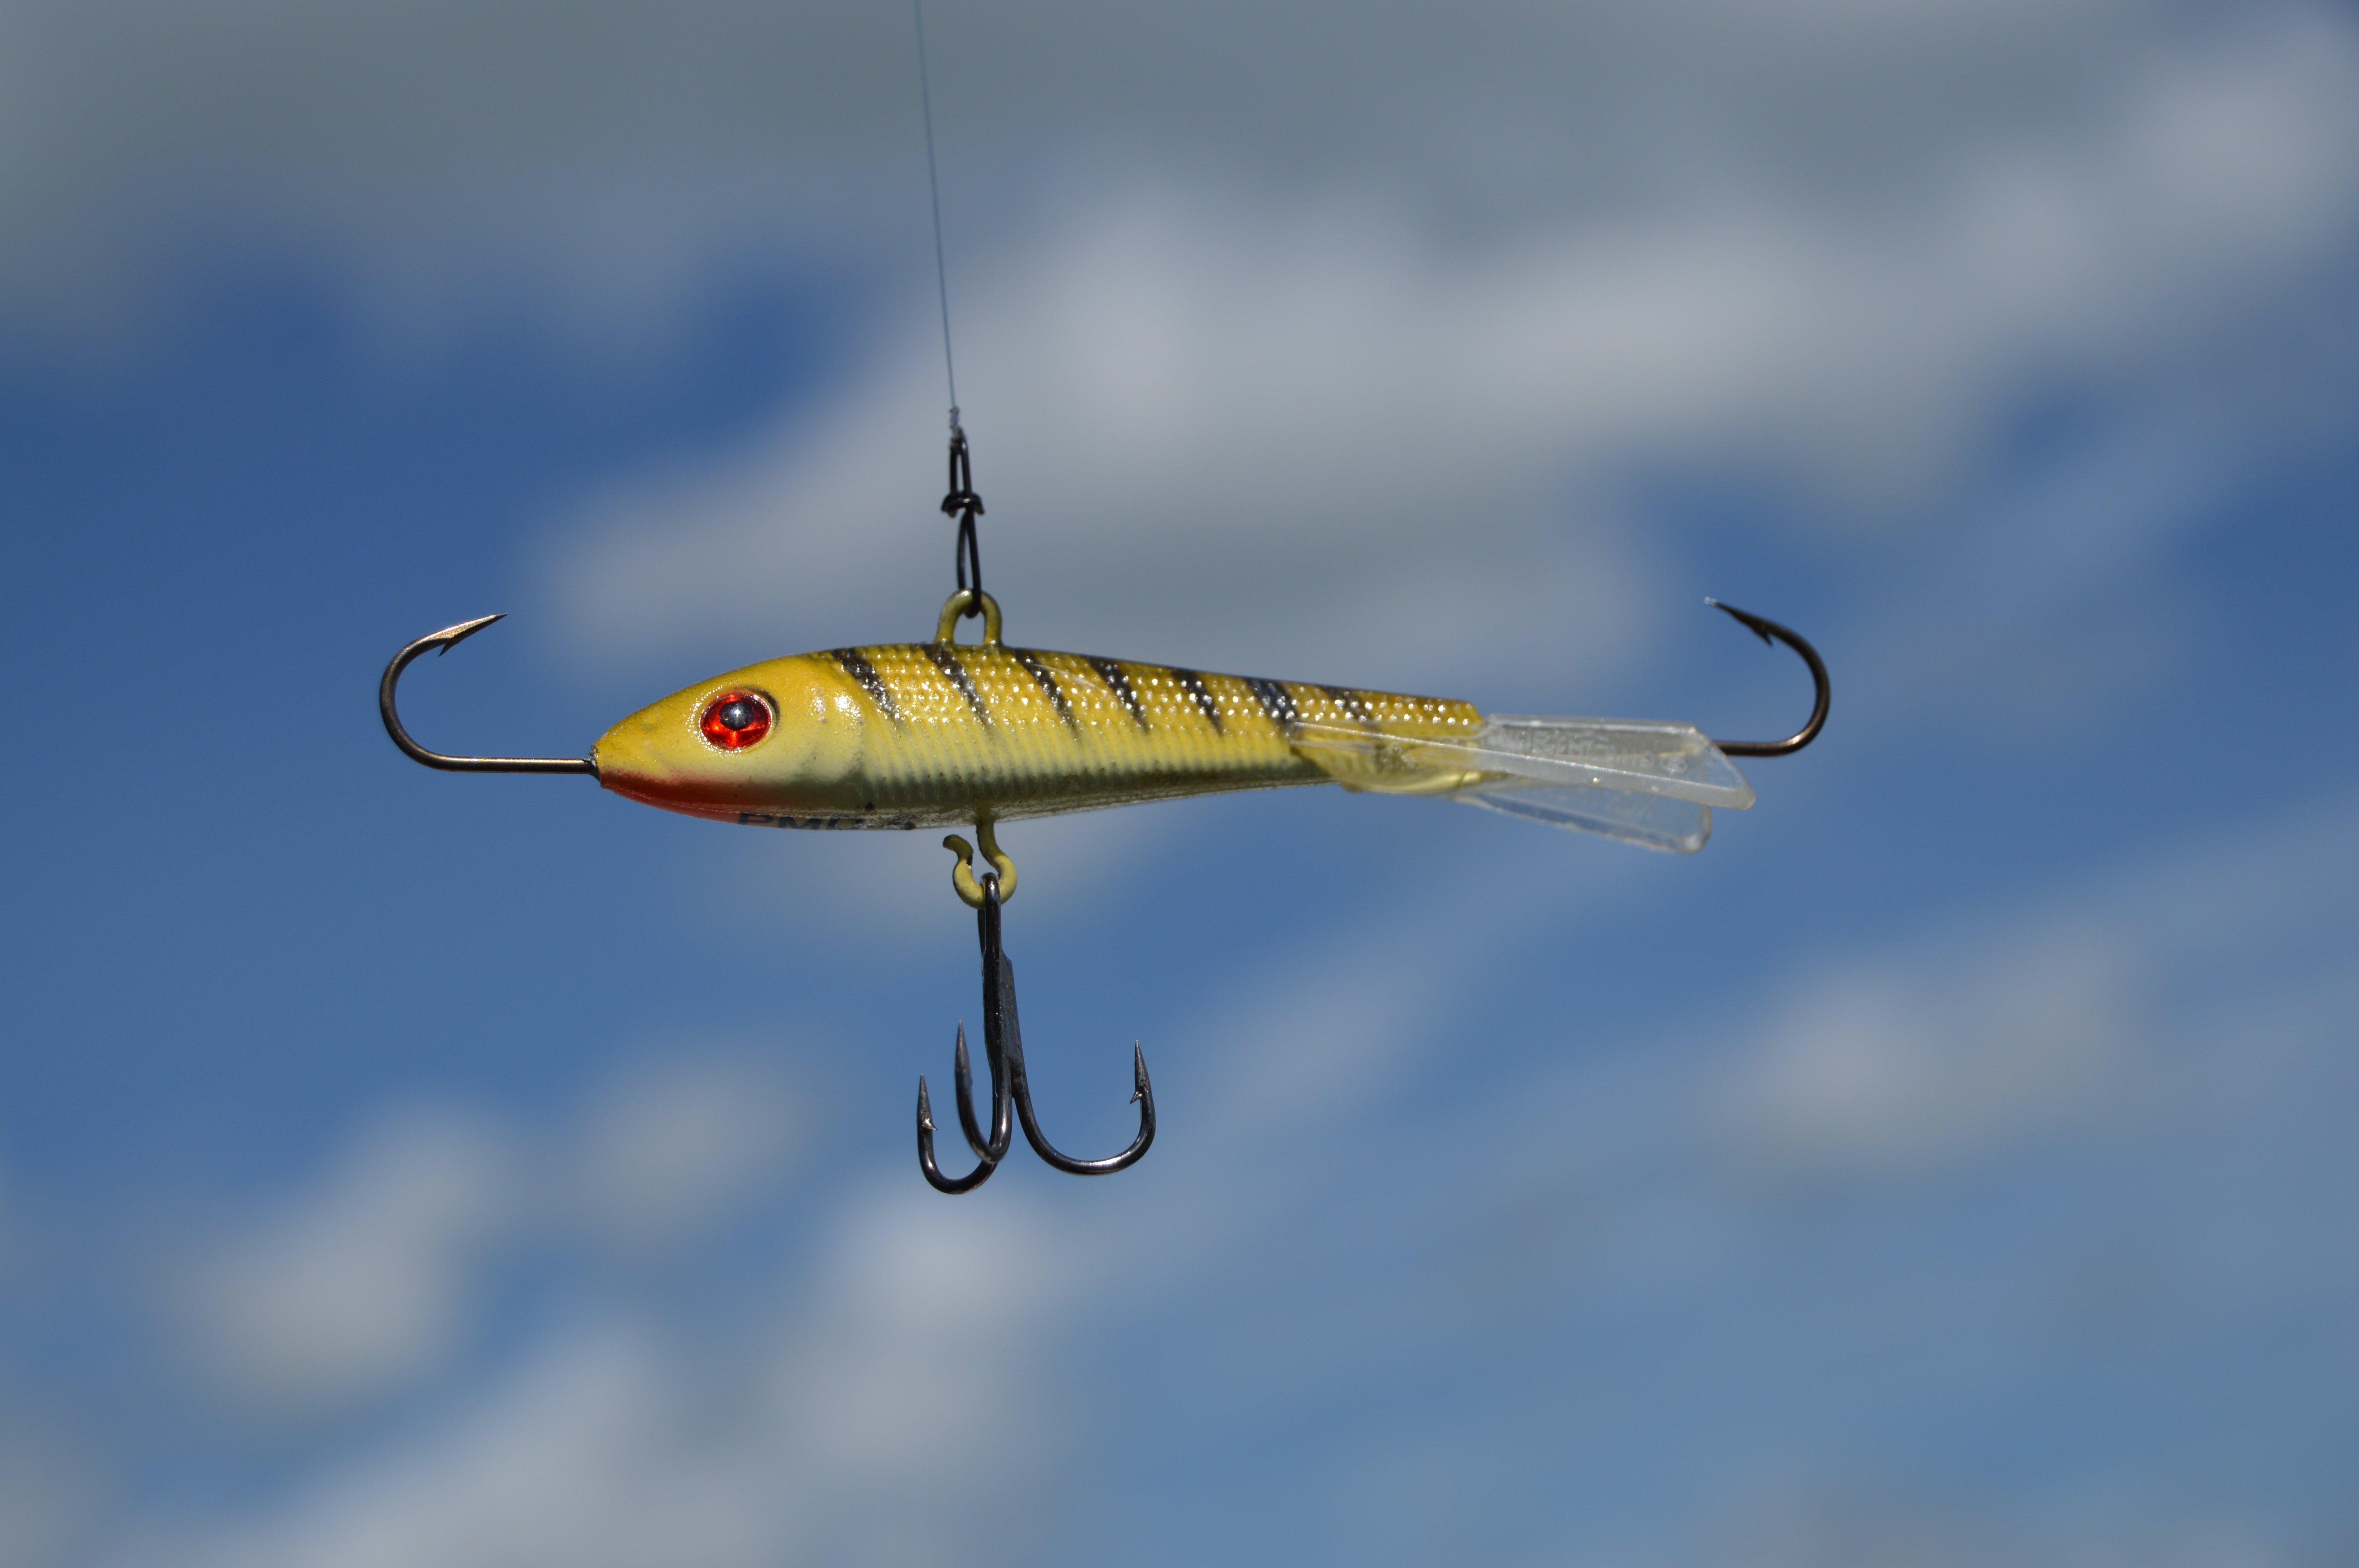 Photos of Walleye Fishing Lures and Tackle